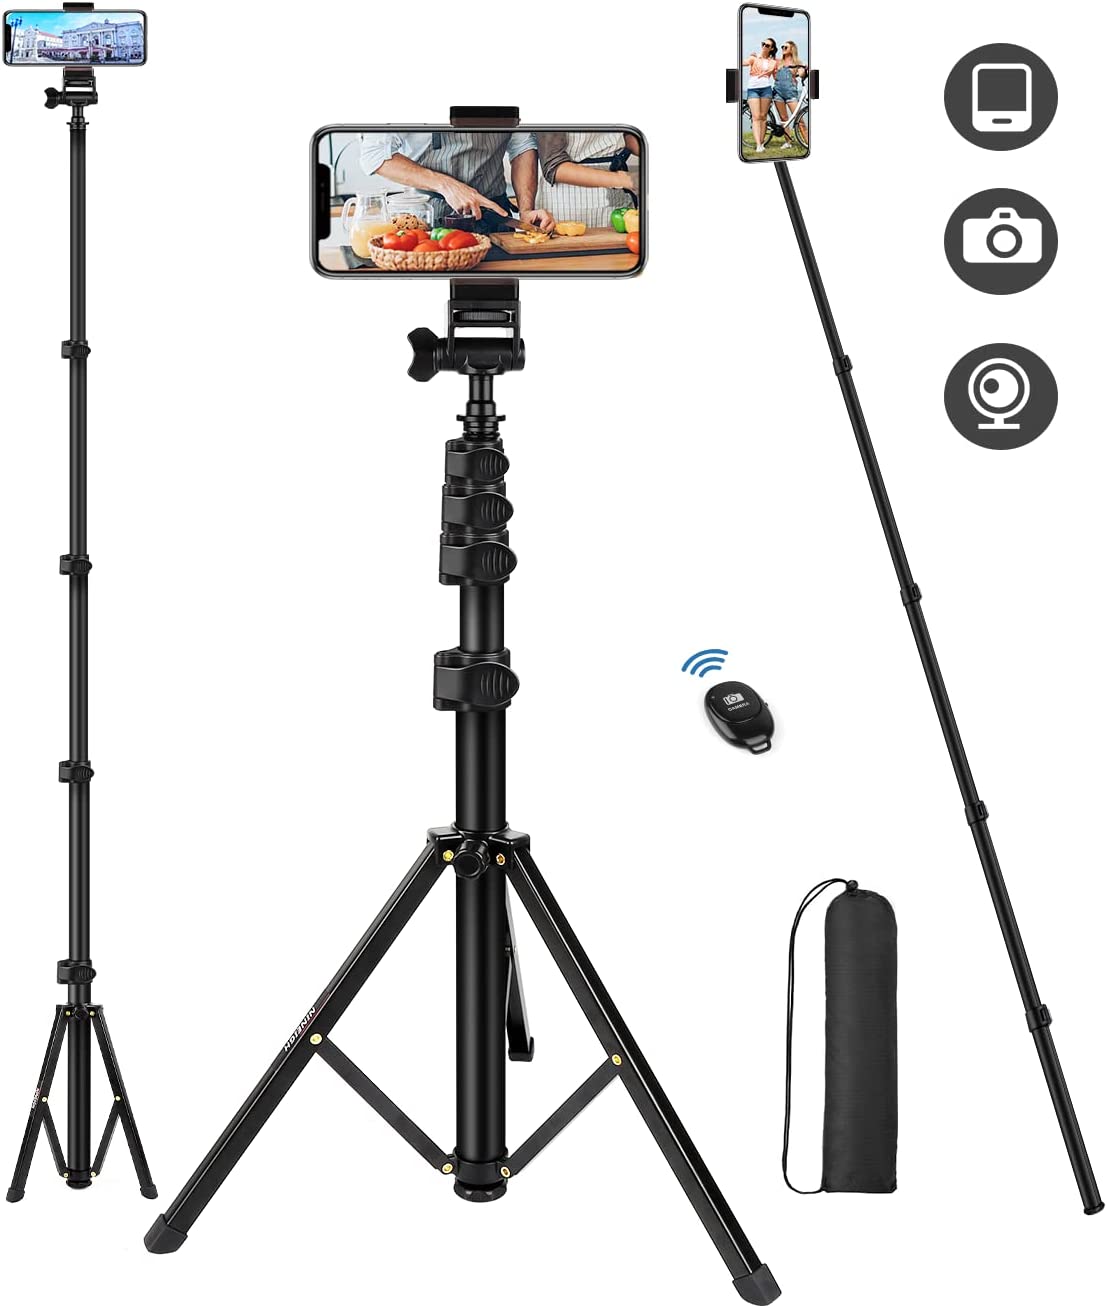 Water bottle + tripod + phone stand all in one 🤍 stainless steel and